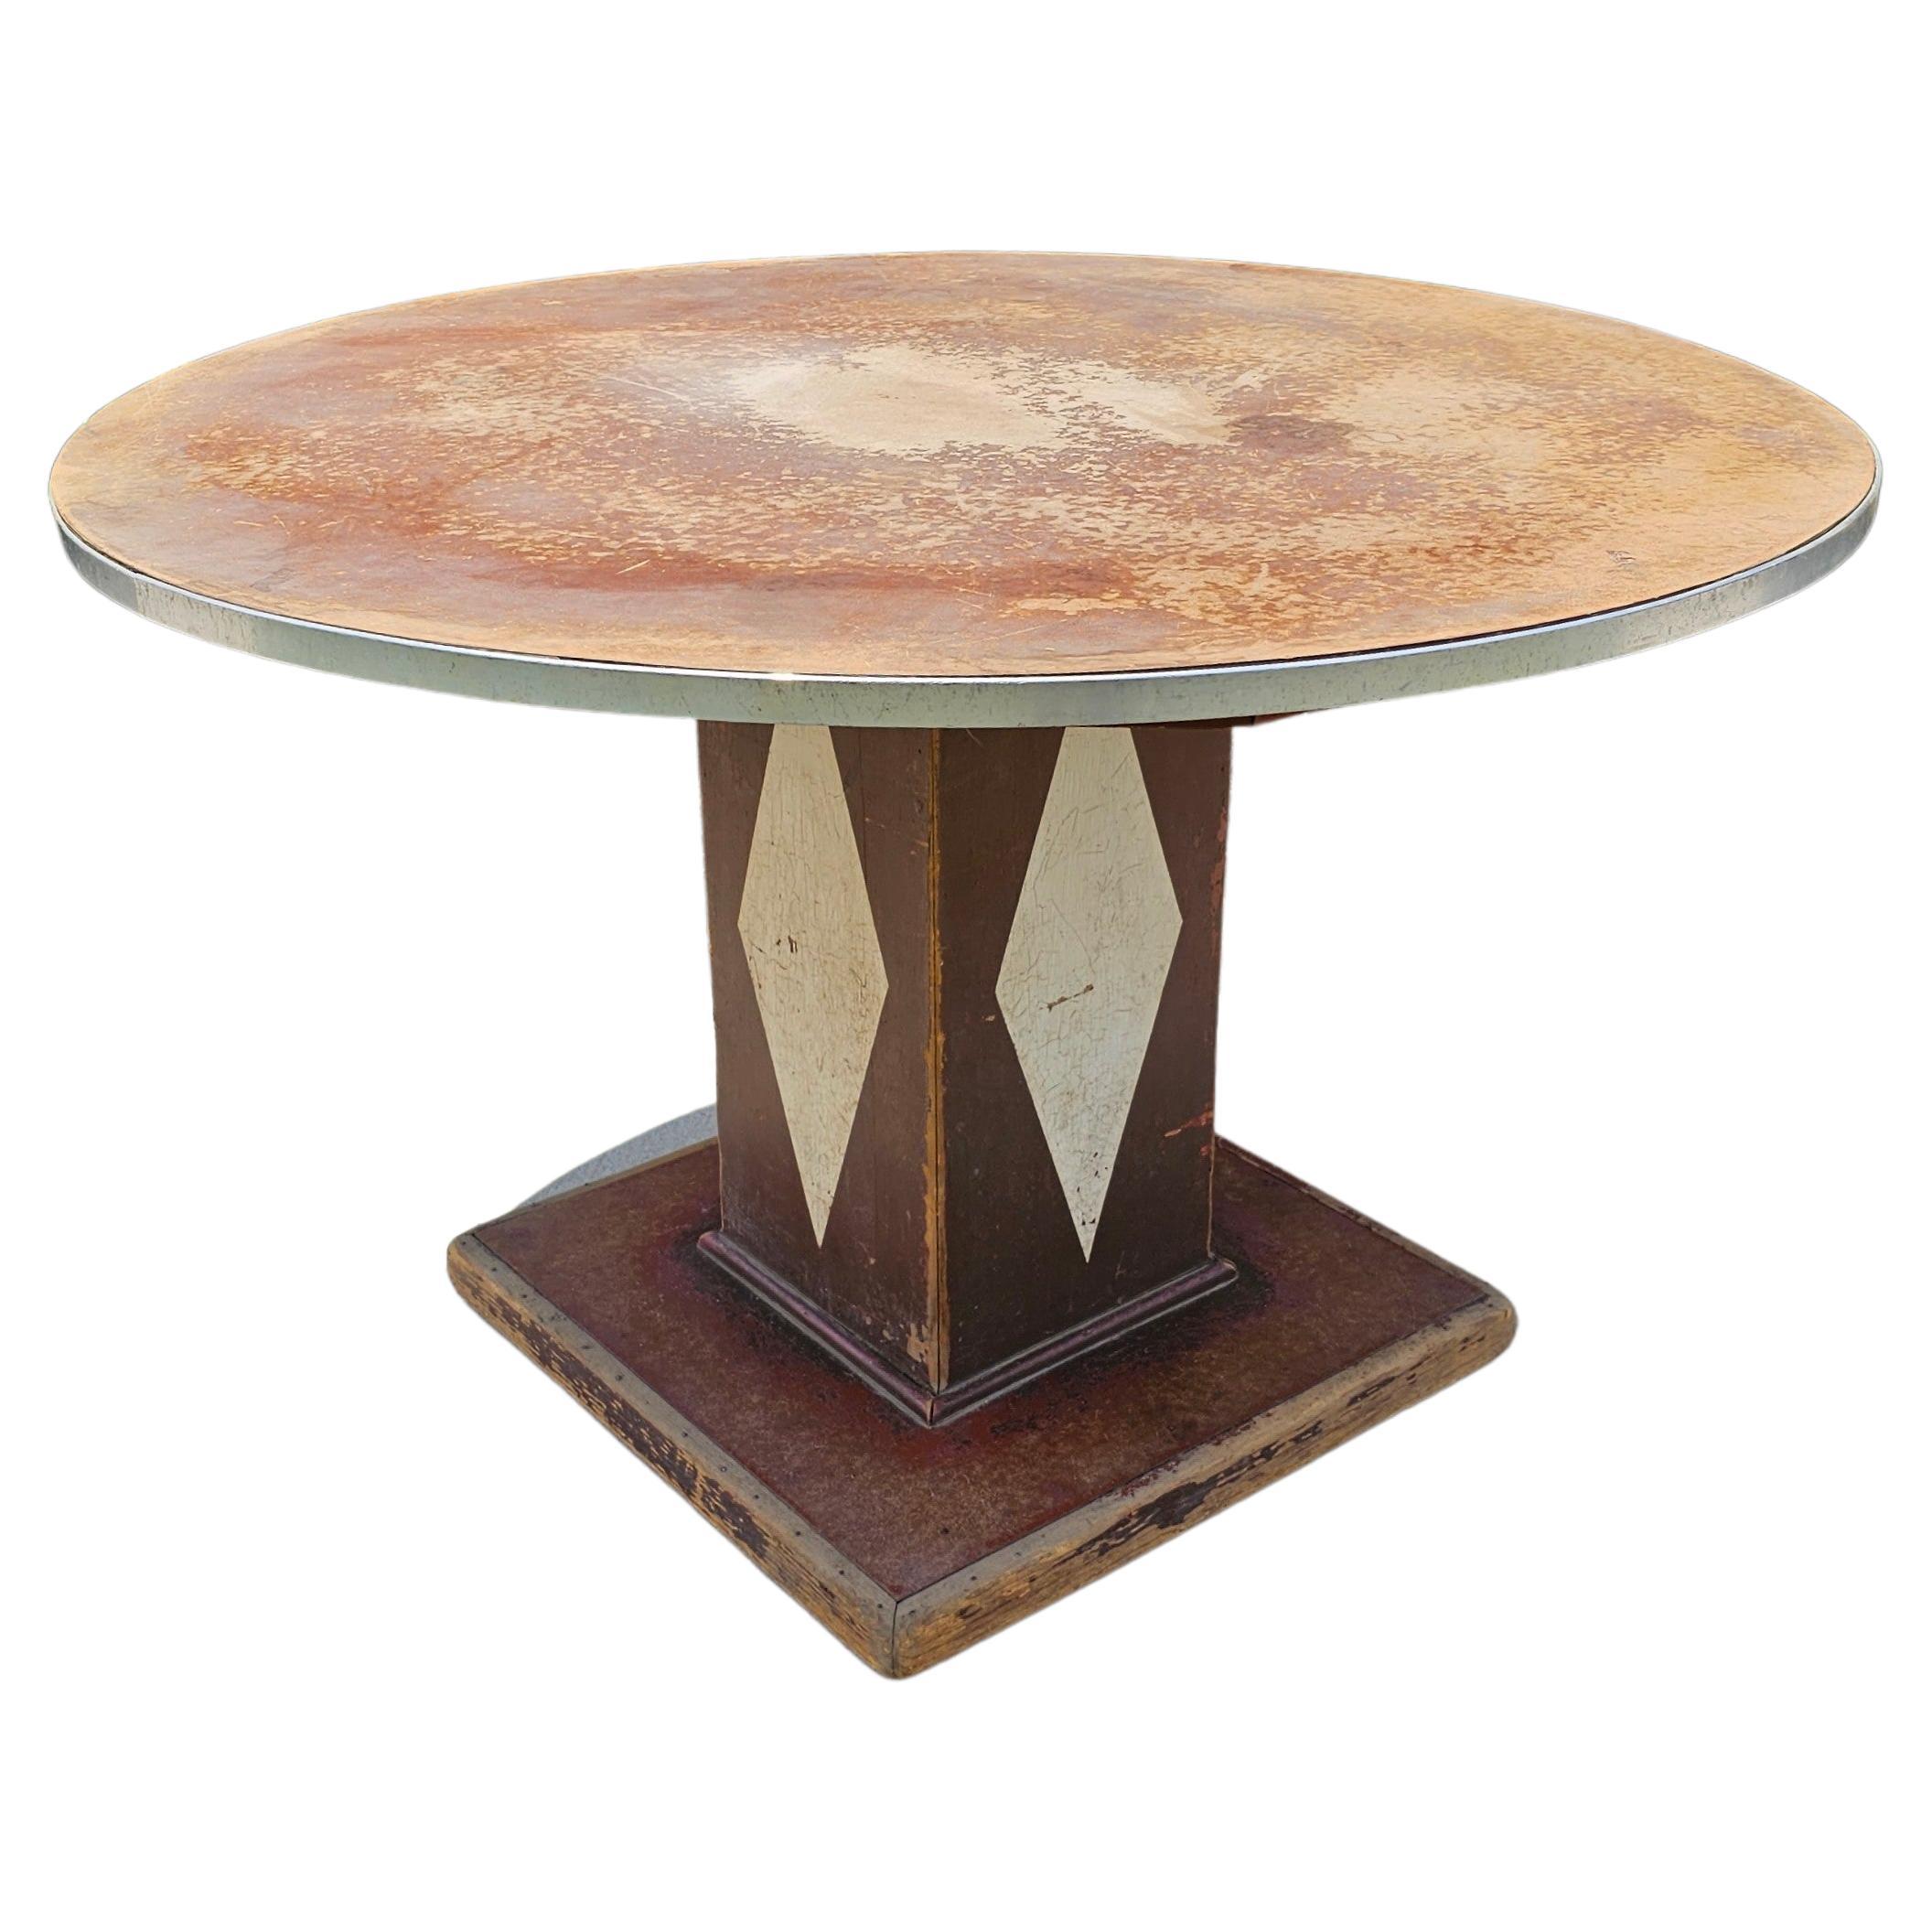 Industrial Art Deco Round Retail Store Display Table